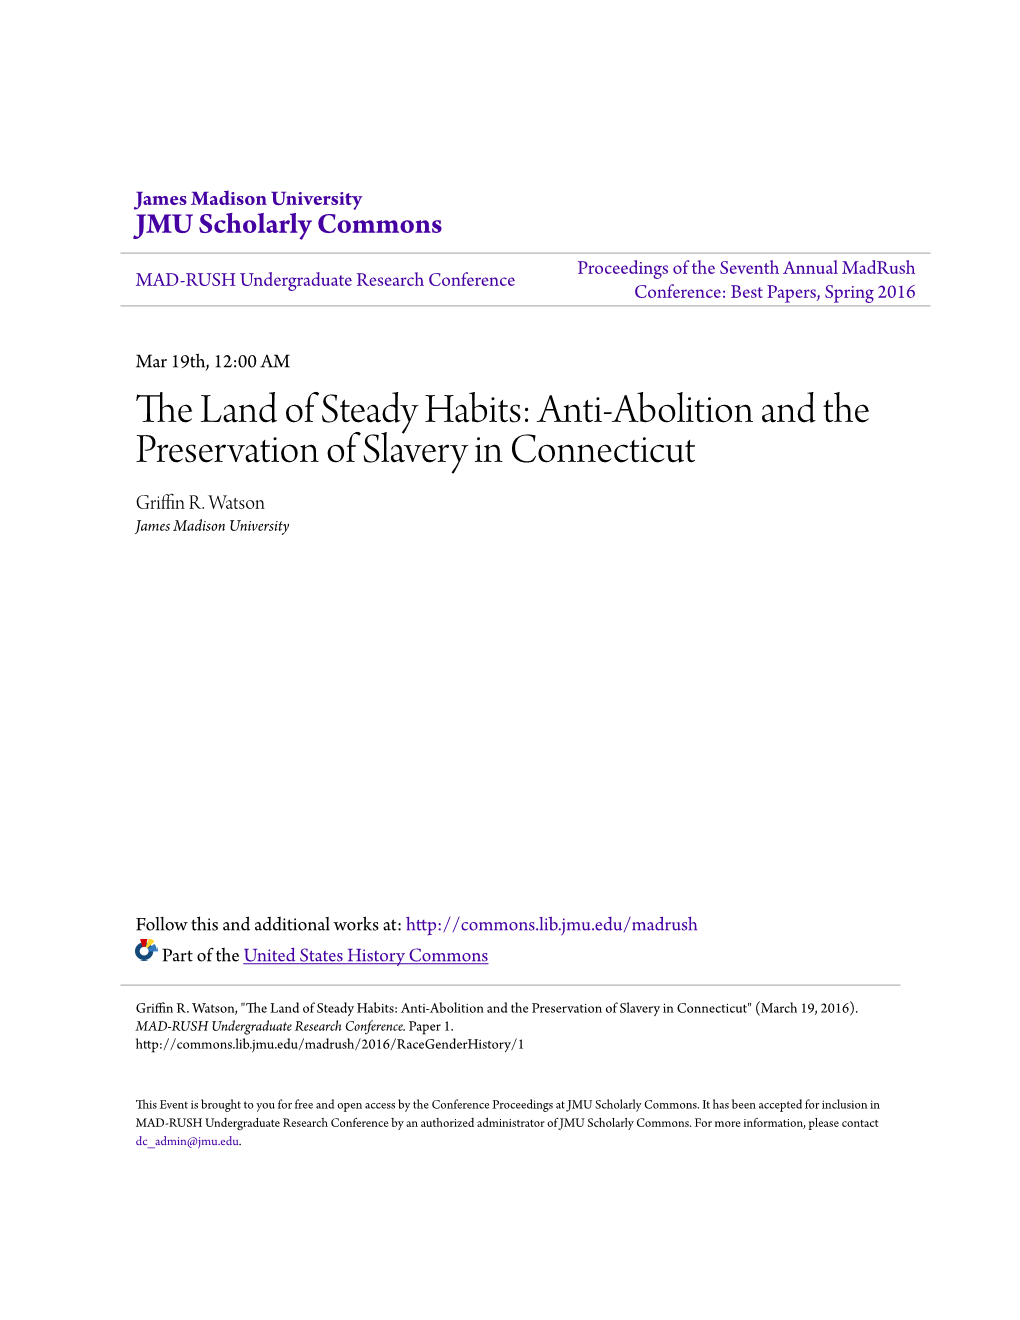 Anti-Abolition and the Preservation of Slavery in Connecticut Griffin R